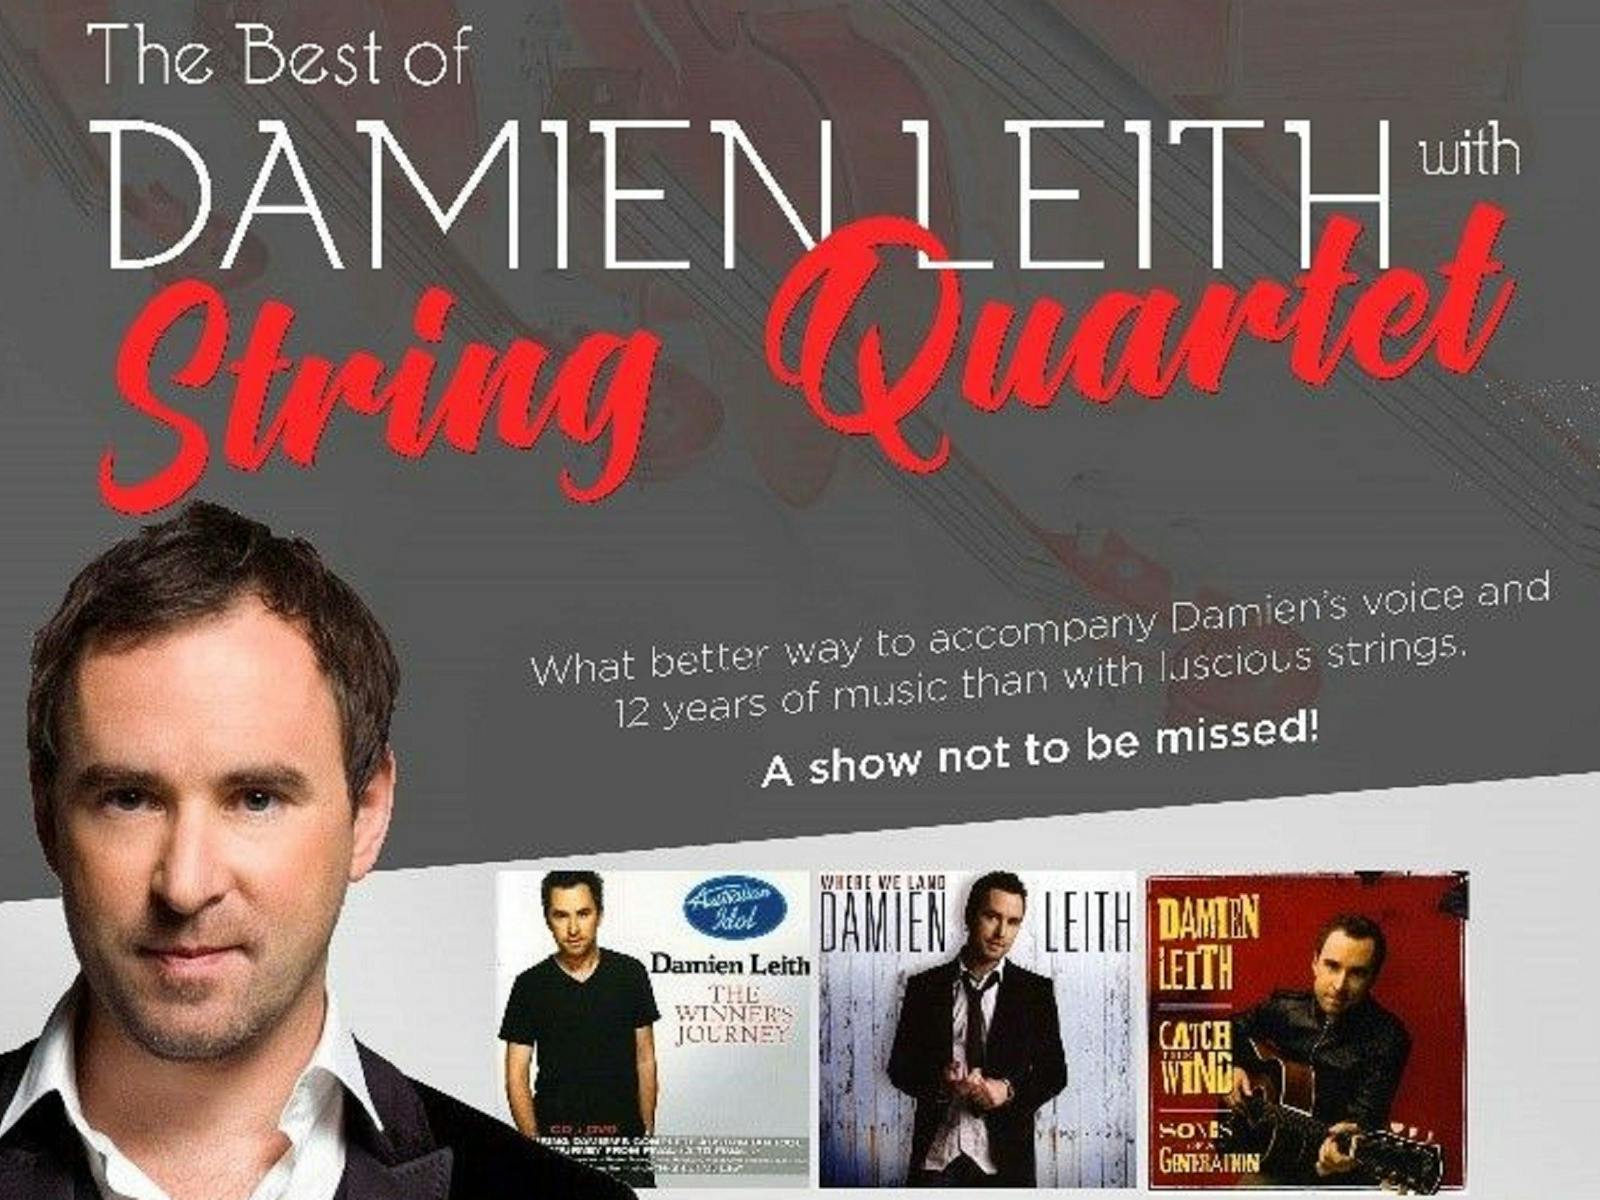 Image for Damien Leith Belmont